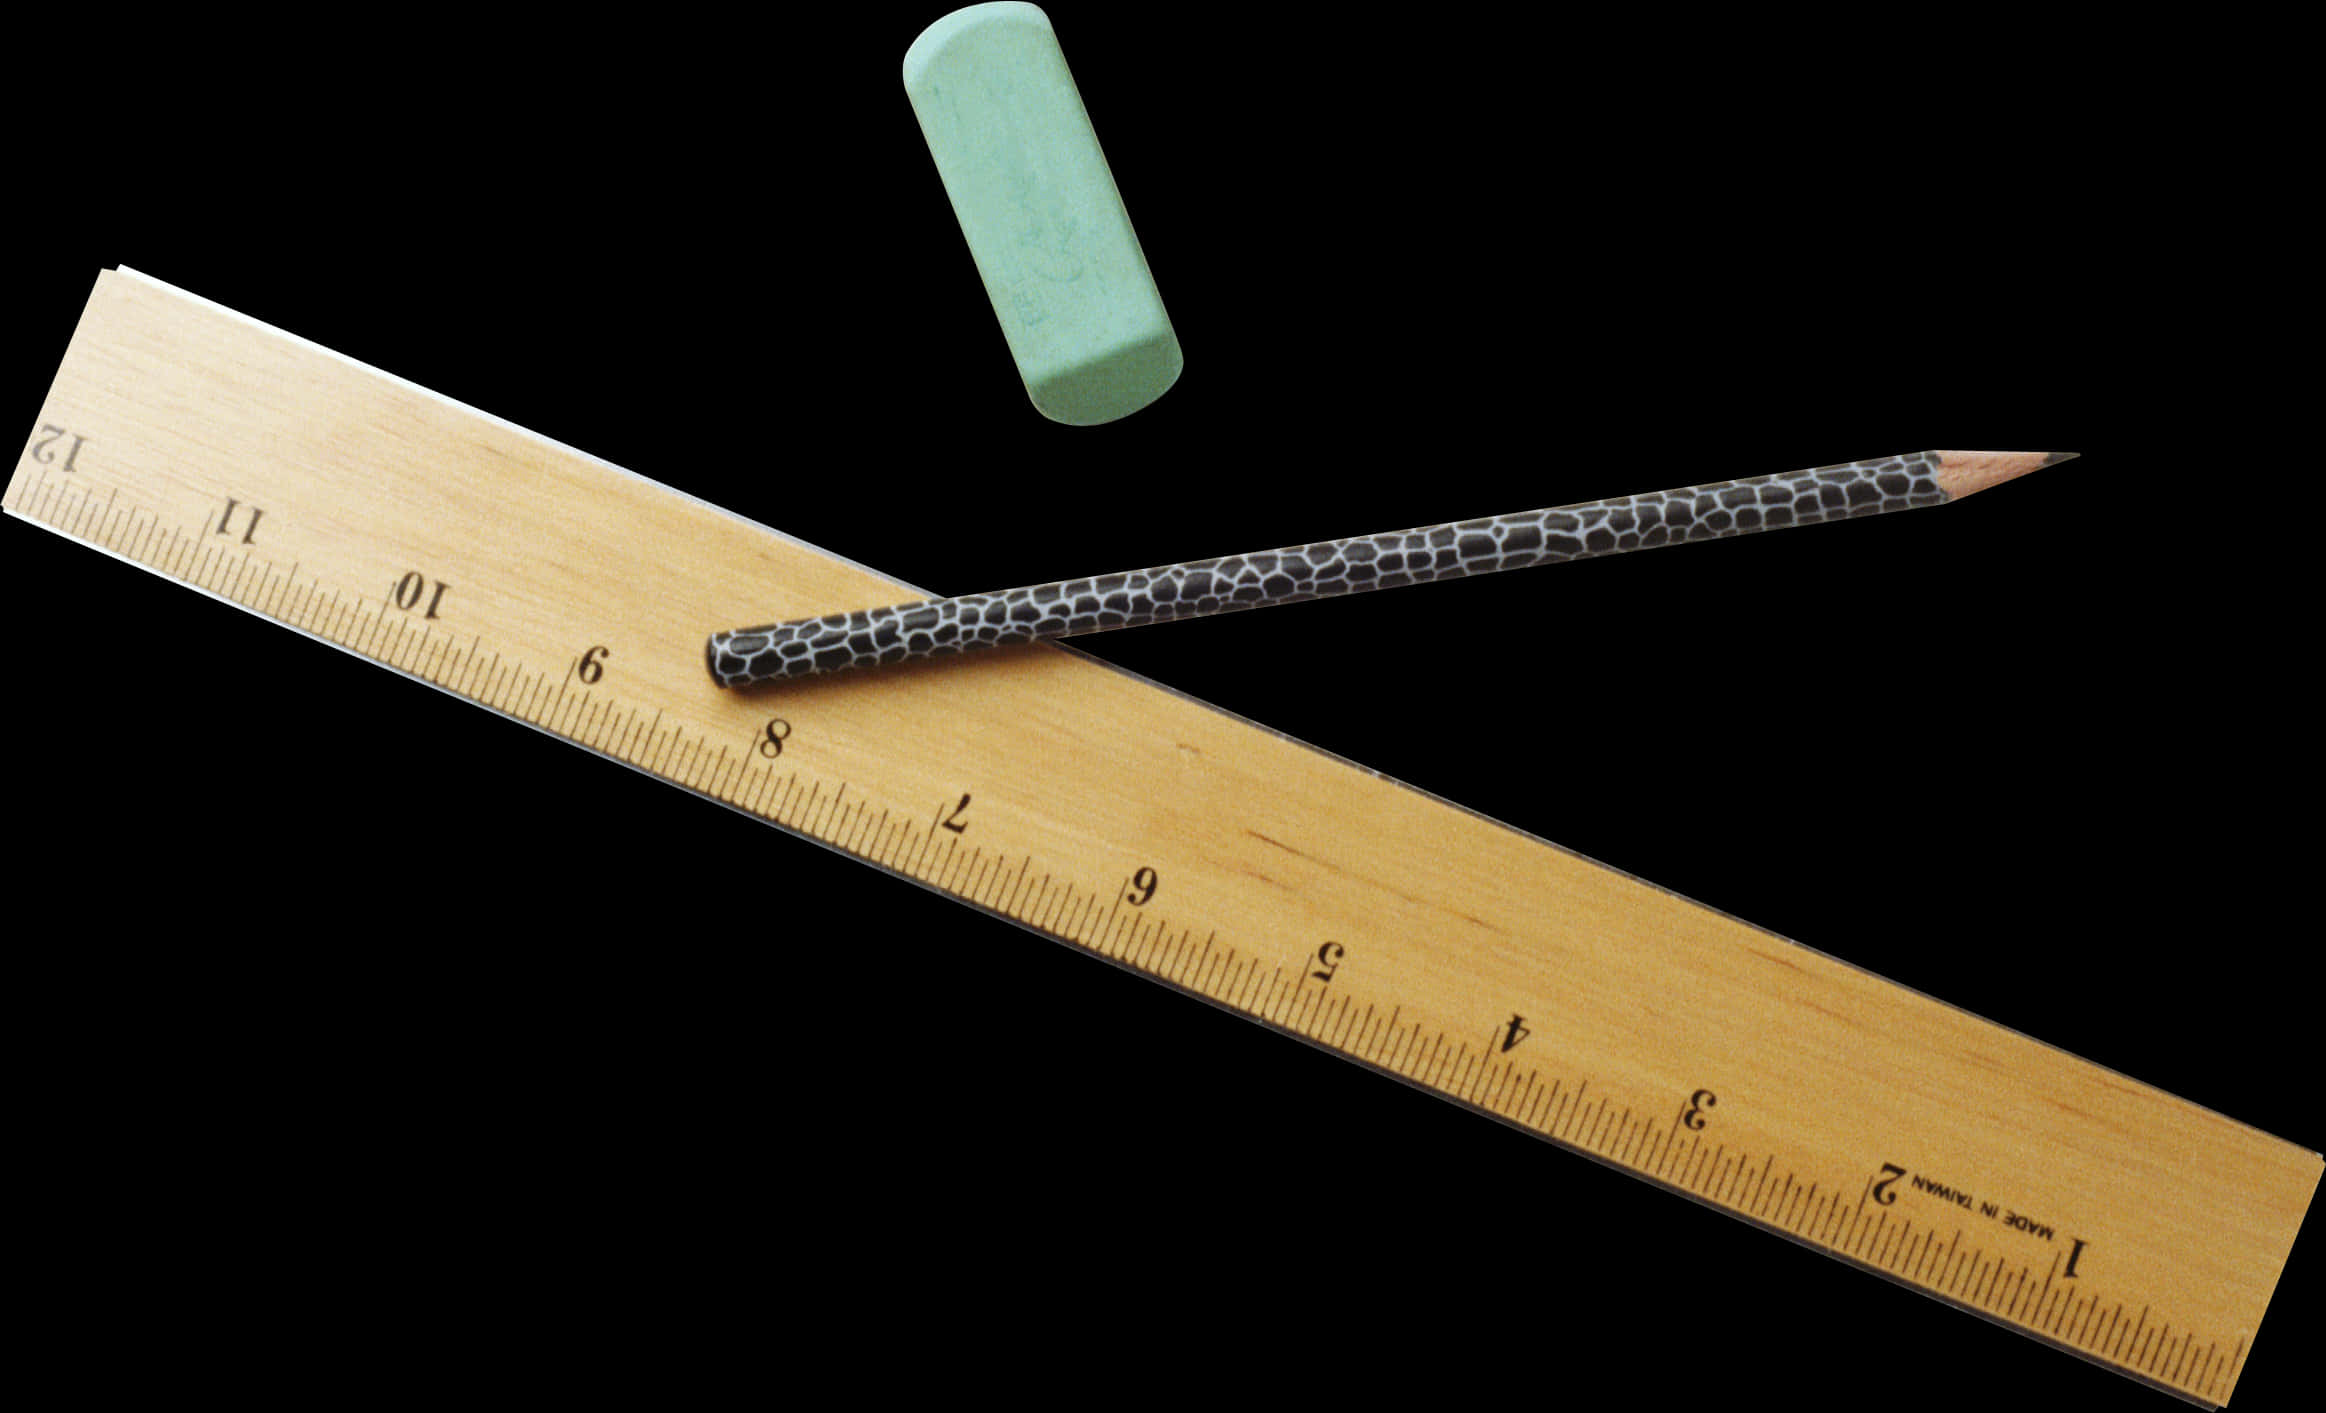 A Pencil And Ruler With Eraser